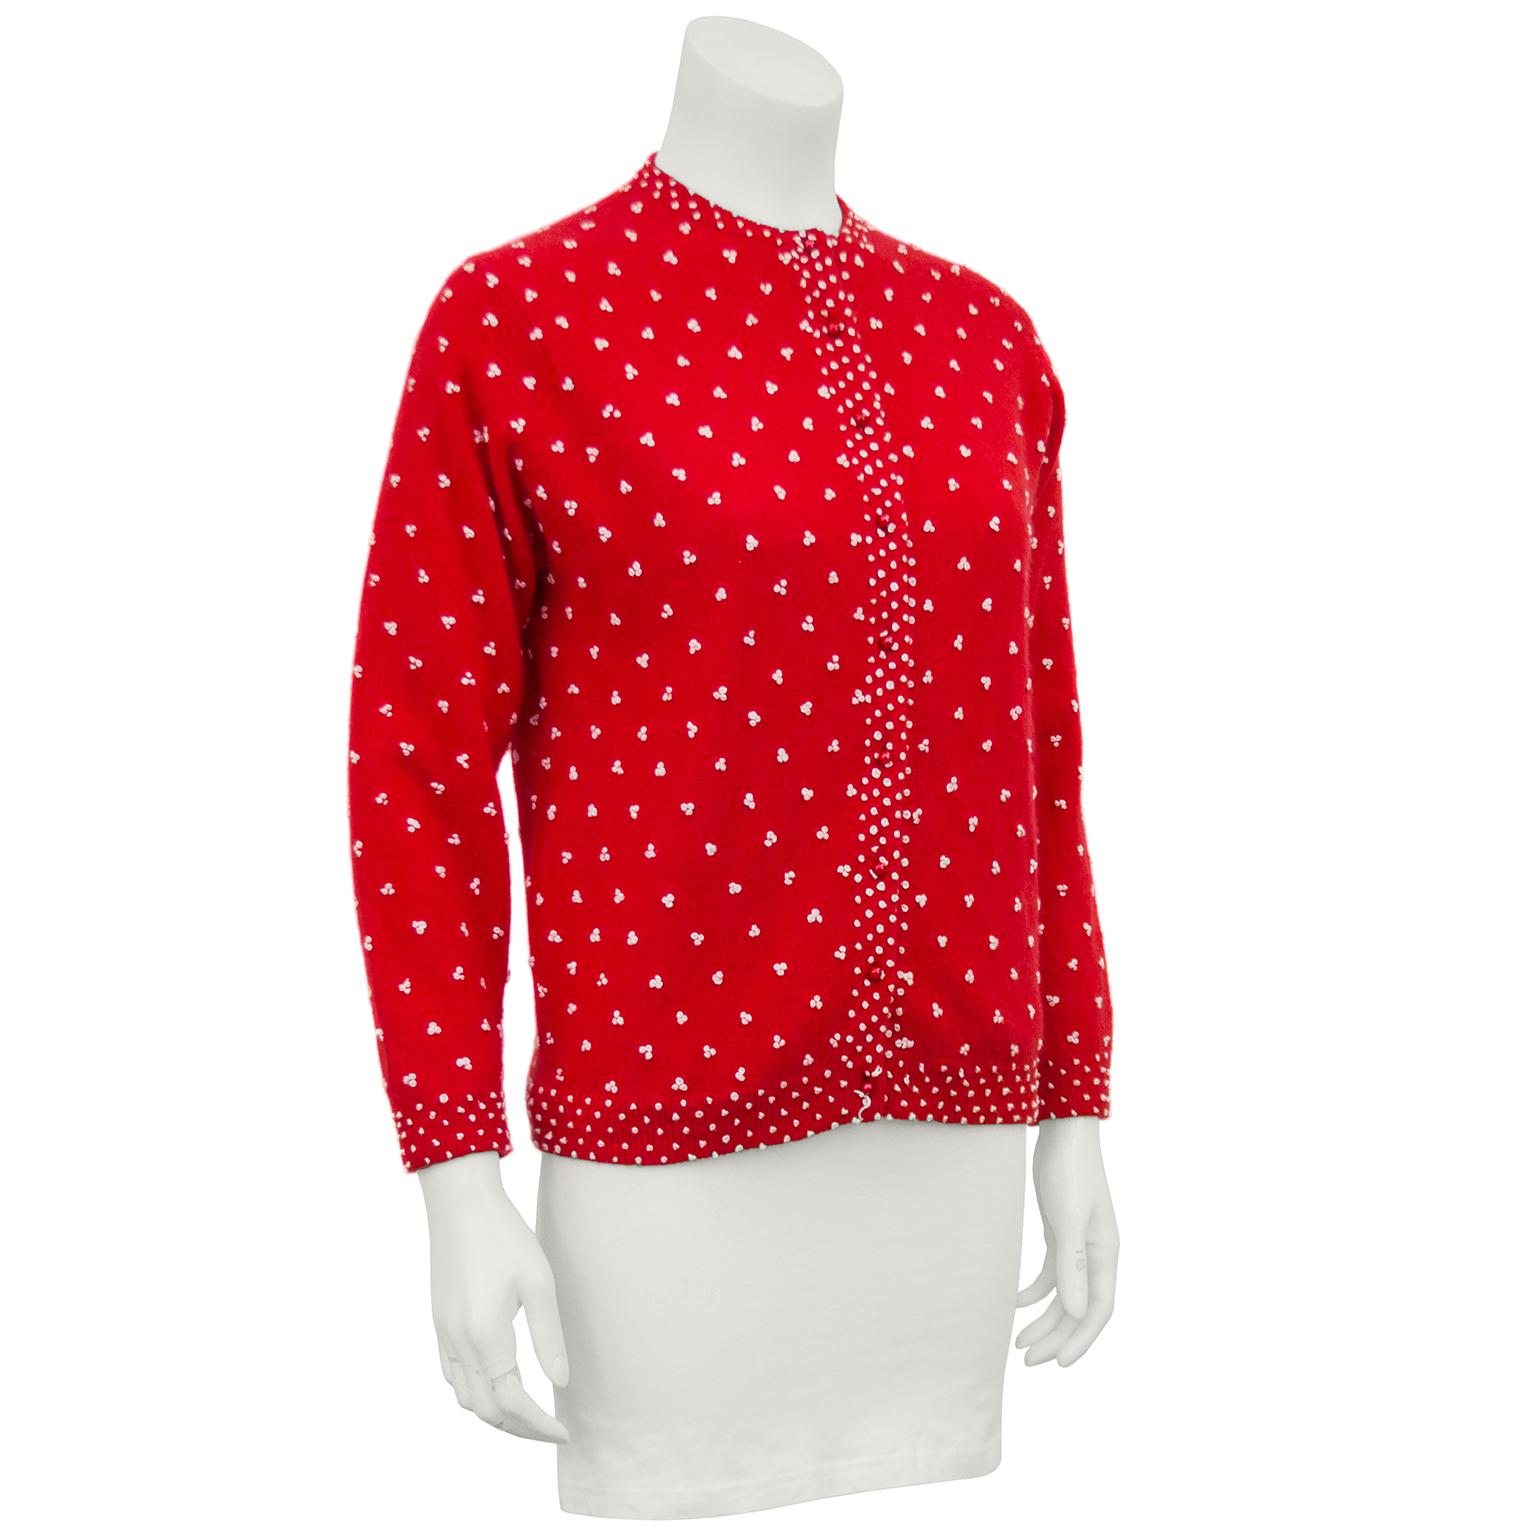 Chic red knit 1950's cardigan with beige French knot details. So often these cardigans are sequinned or embroidered, or both. This version has all the look but can be worn day or night. Fresh clean condition, fully lined and ready to wear. Feels